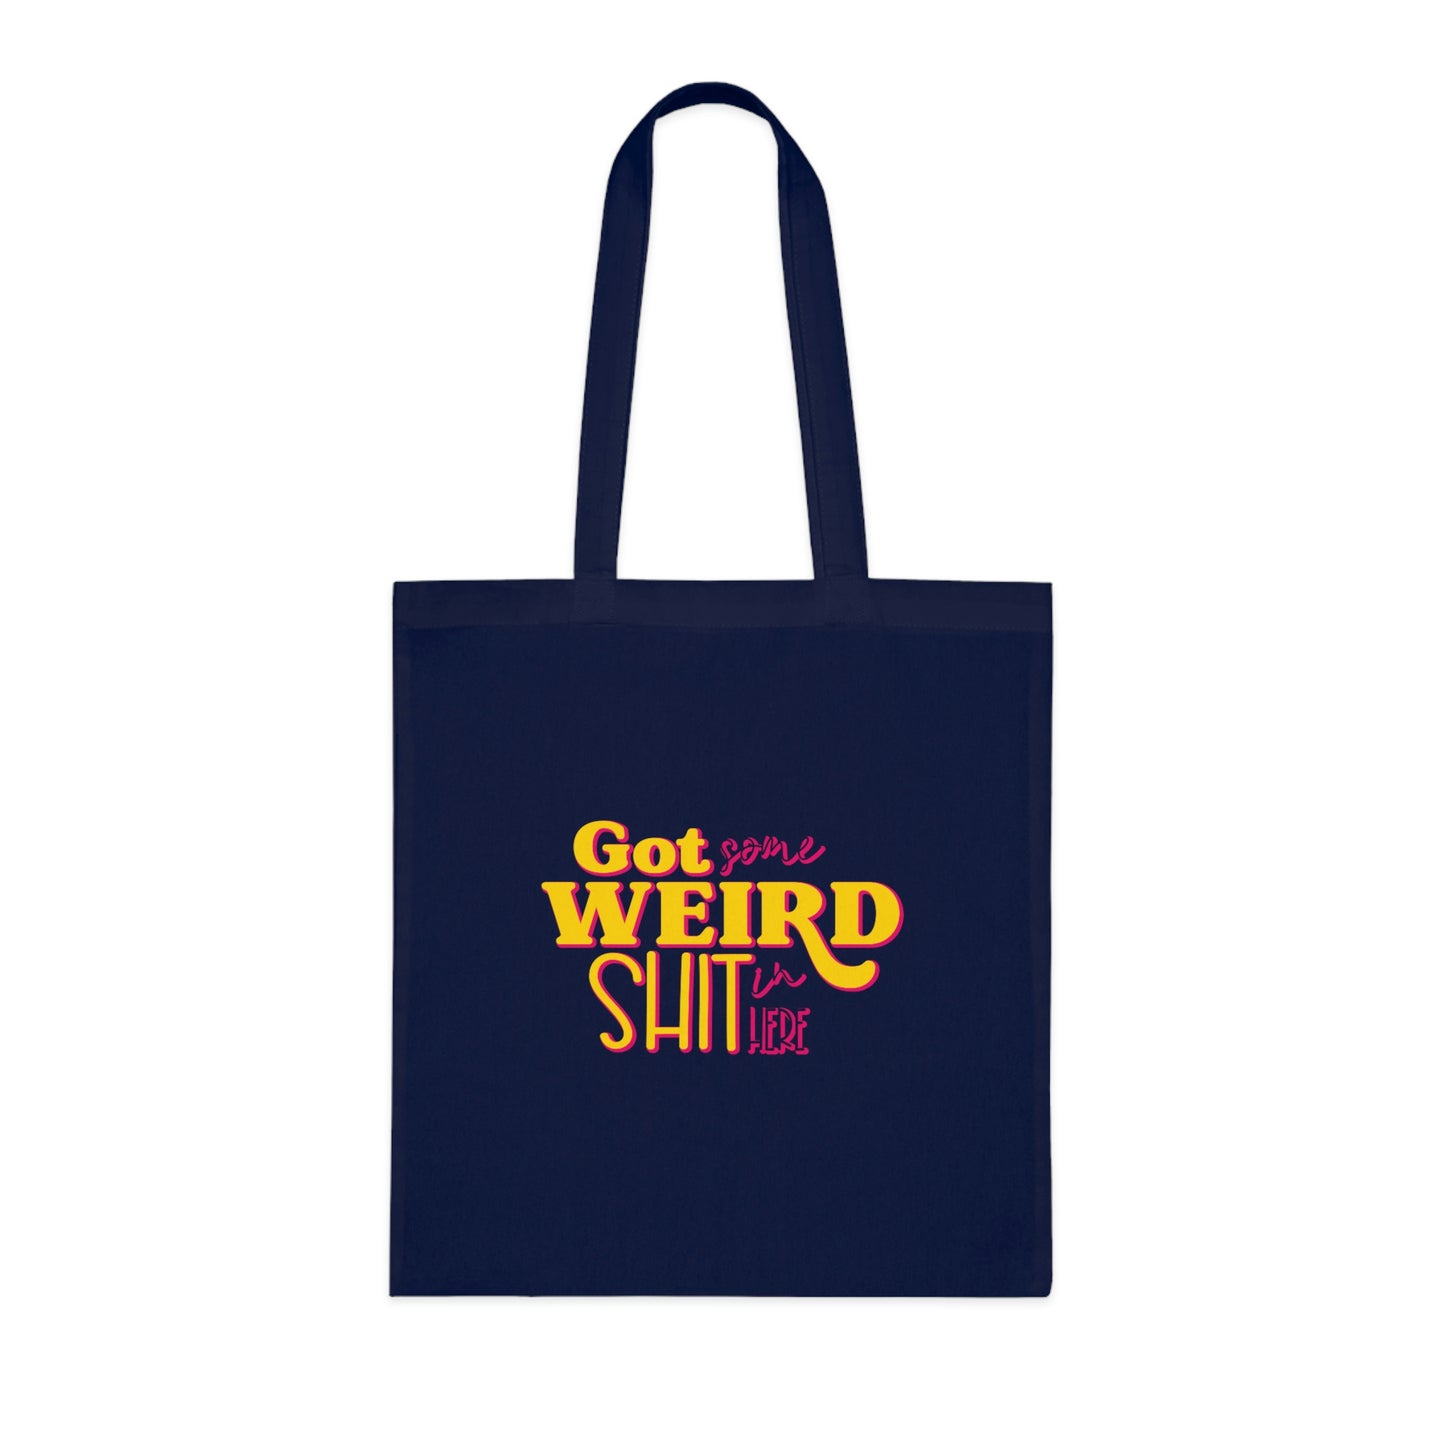 #weirdo | What kinda weird shit are you hiding in your bag? This dark blue bag has our funny meme written at the front of the bag: Got some weird shit in here.